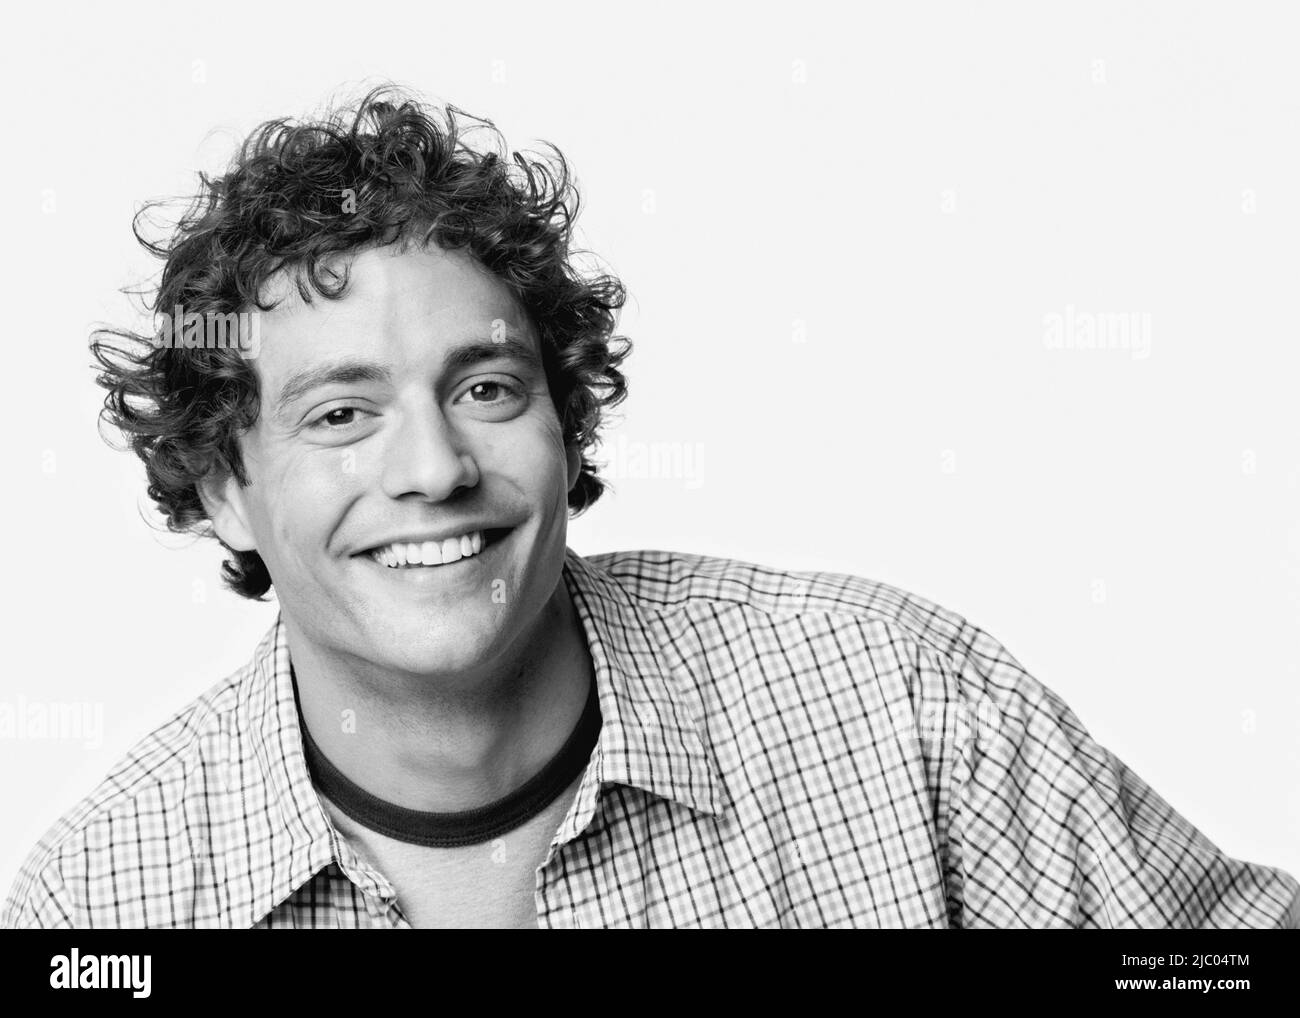 Young man smiling Stock Photo